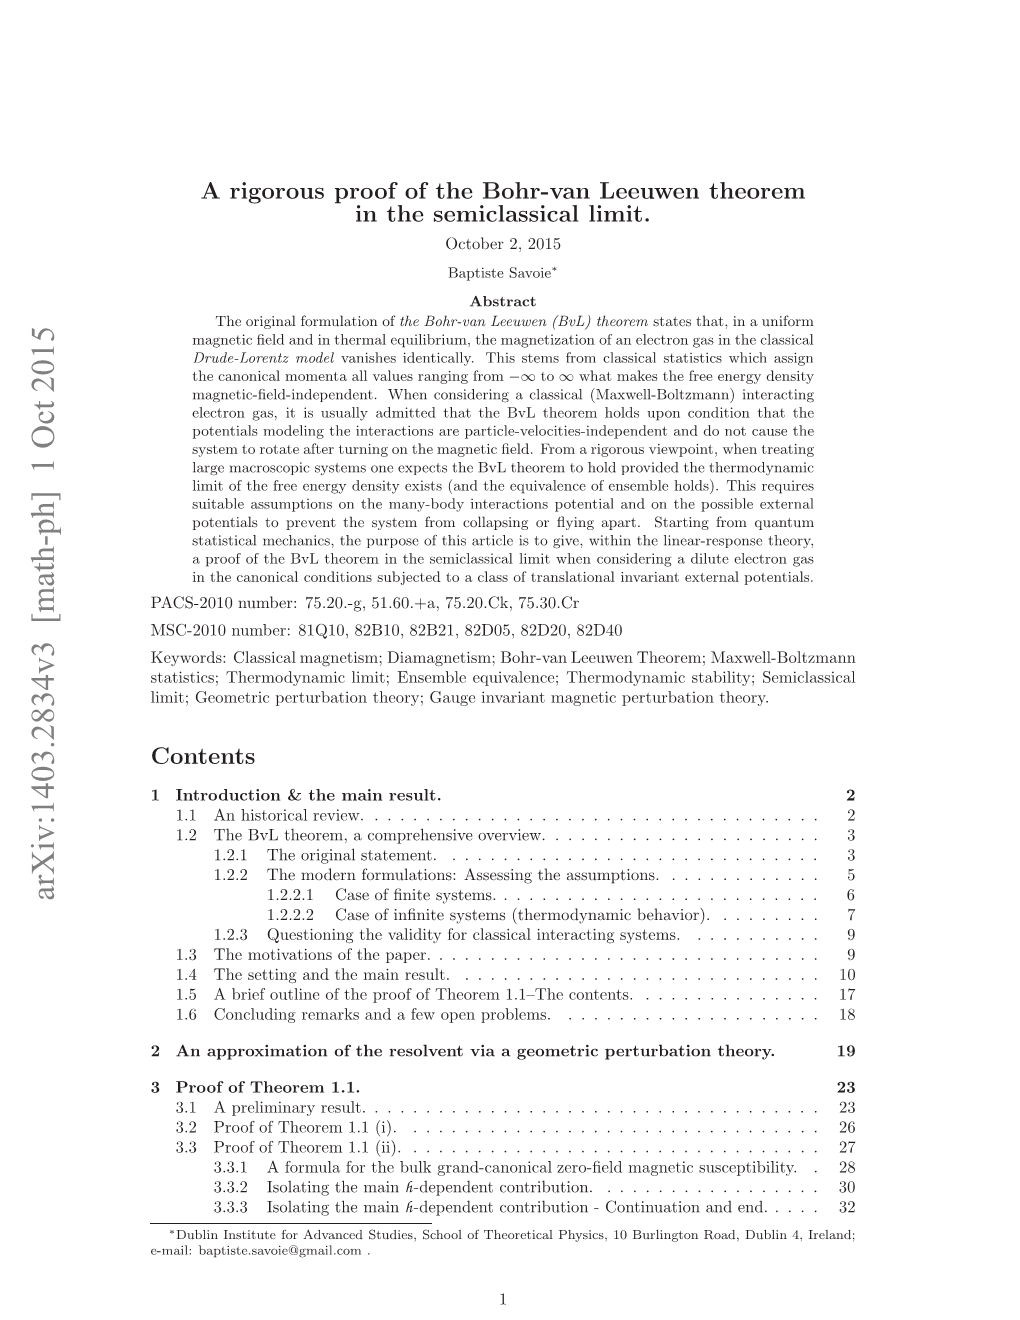 A Rigorous Proof of the Bohr-Van Leeuwen Theorem in The